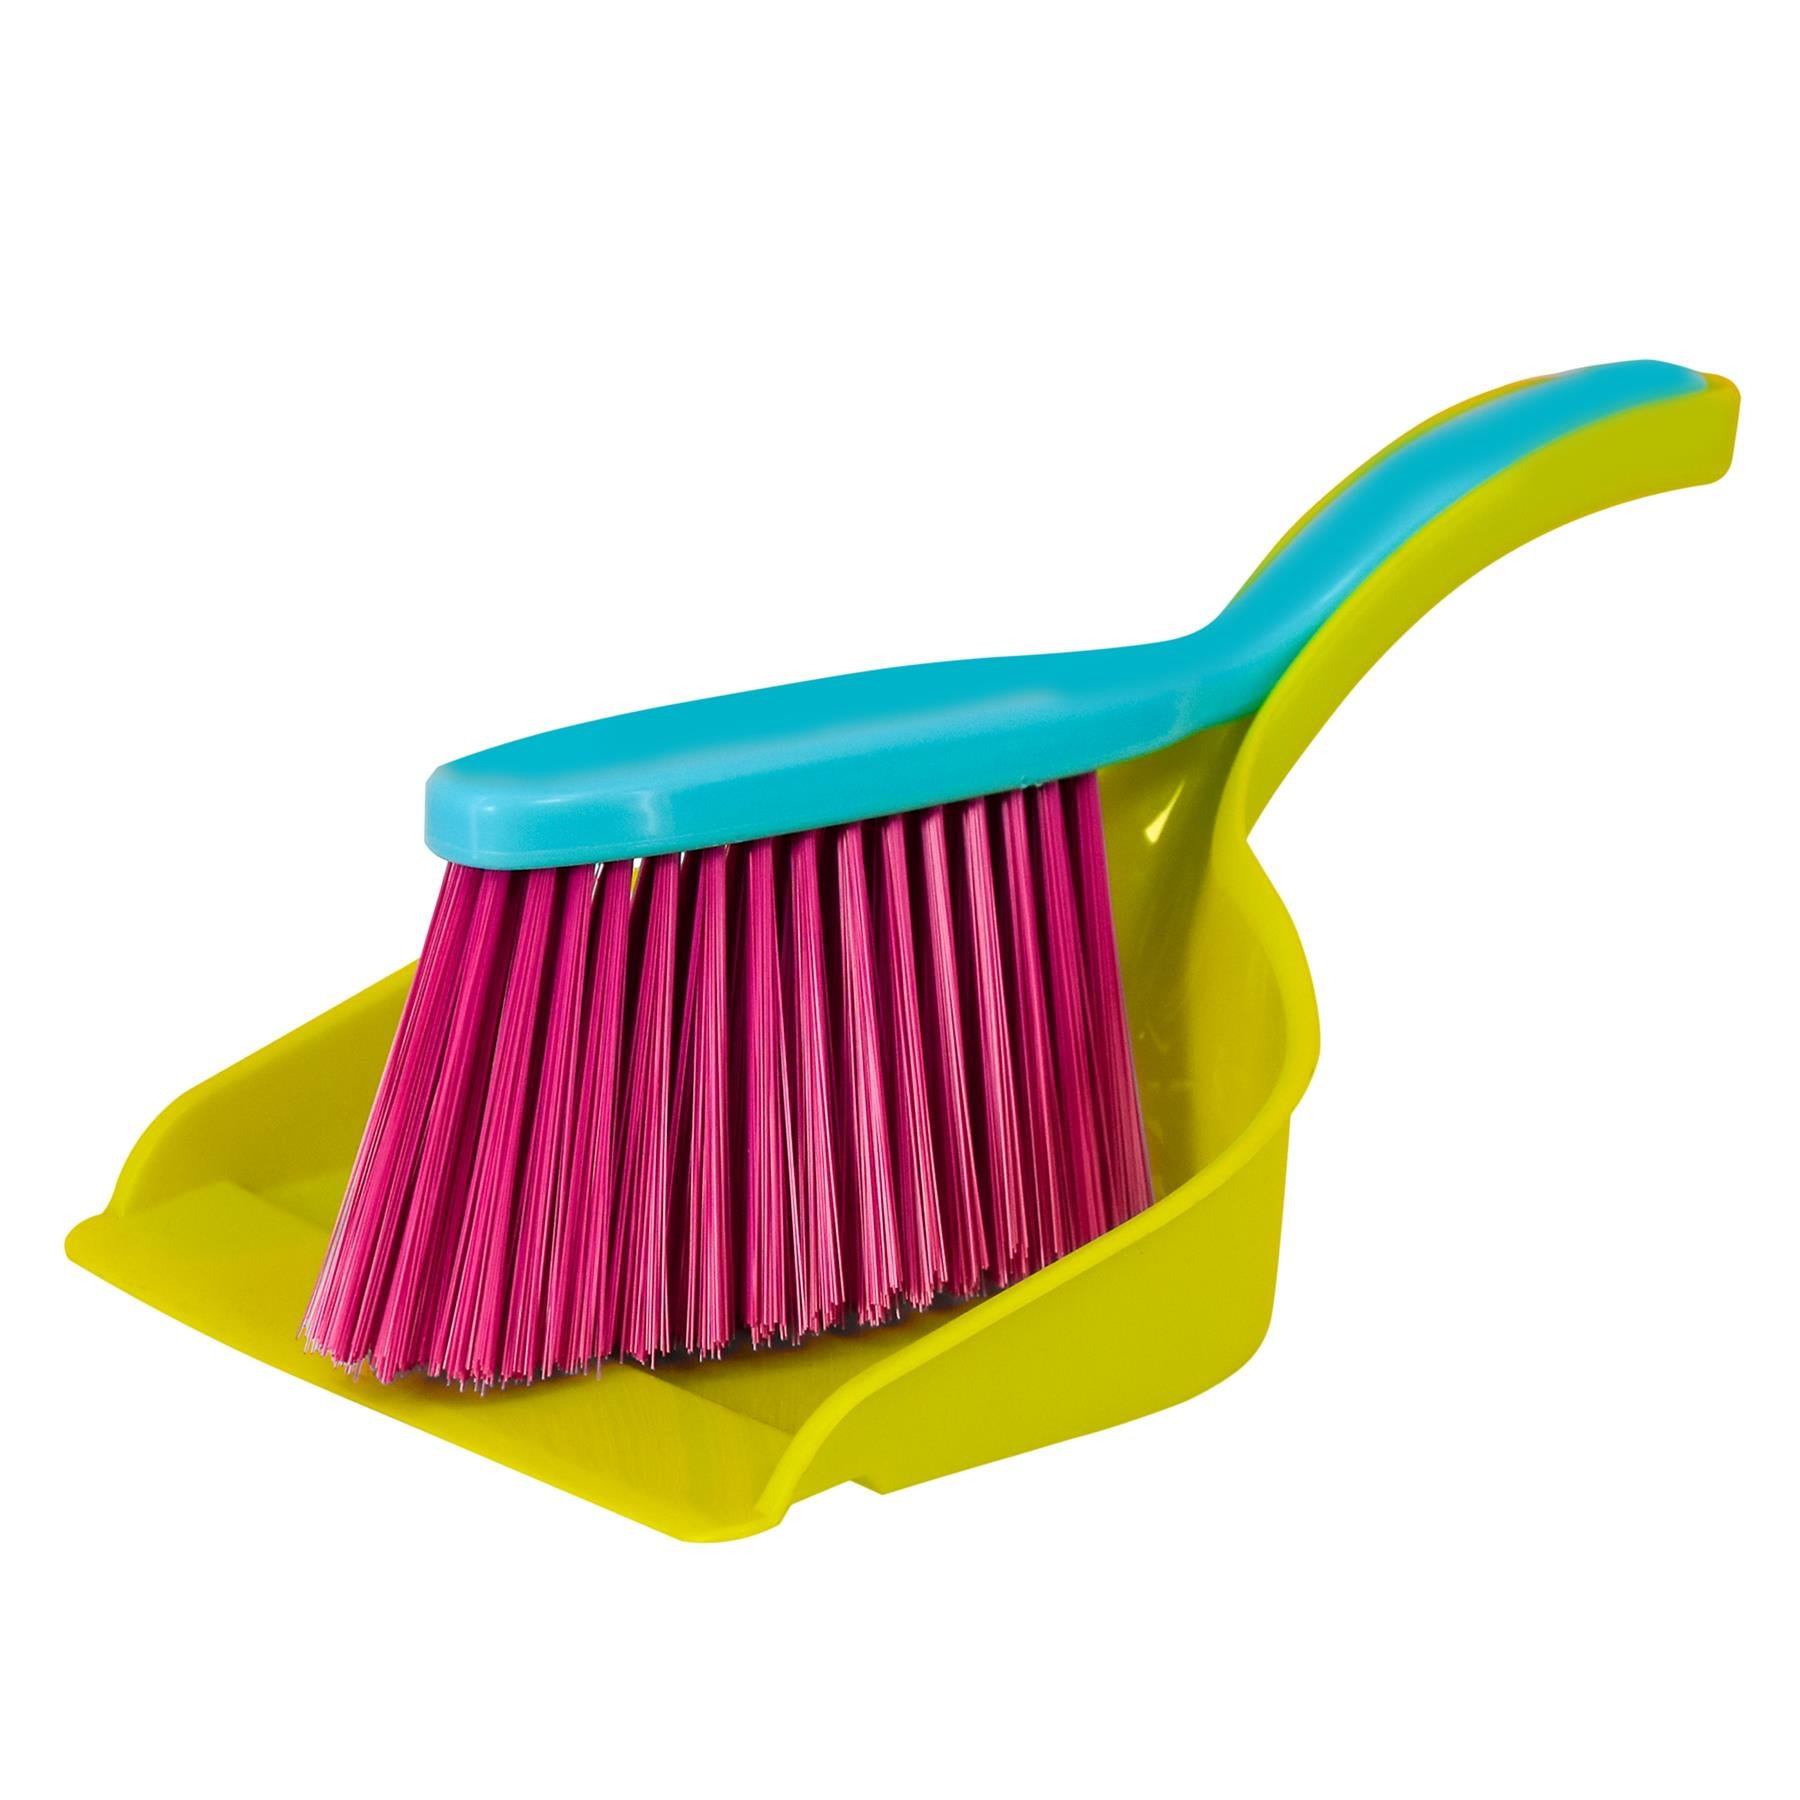 Kids Cleaning Play Set Toy by The Magic Toy Shop - The Magic Toy Shop